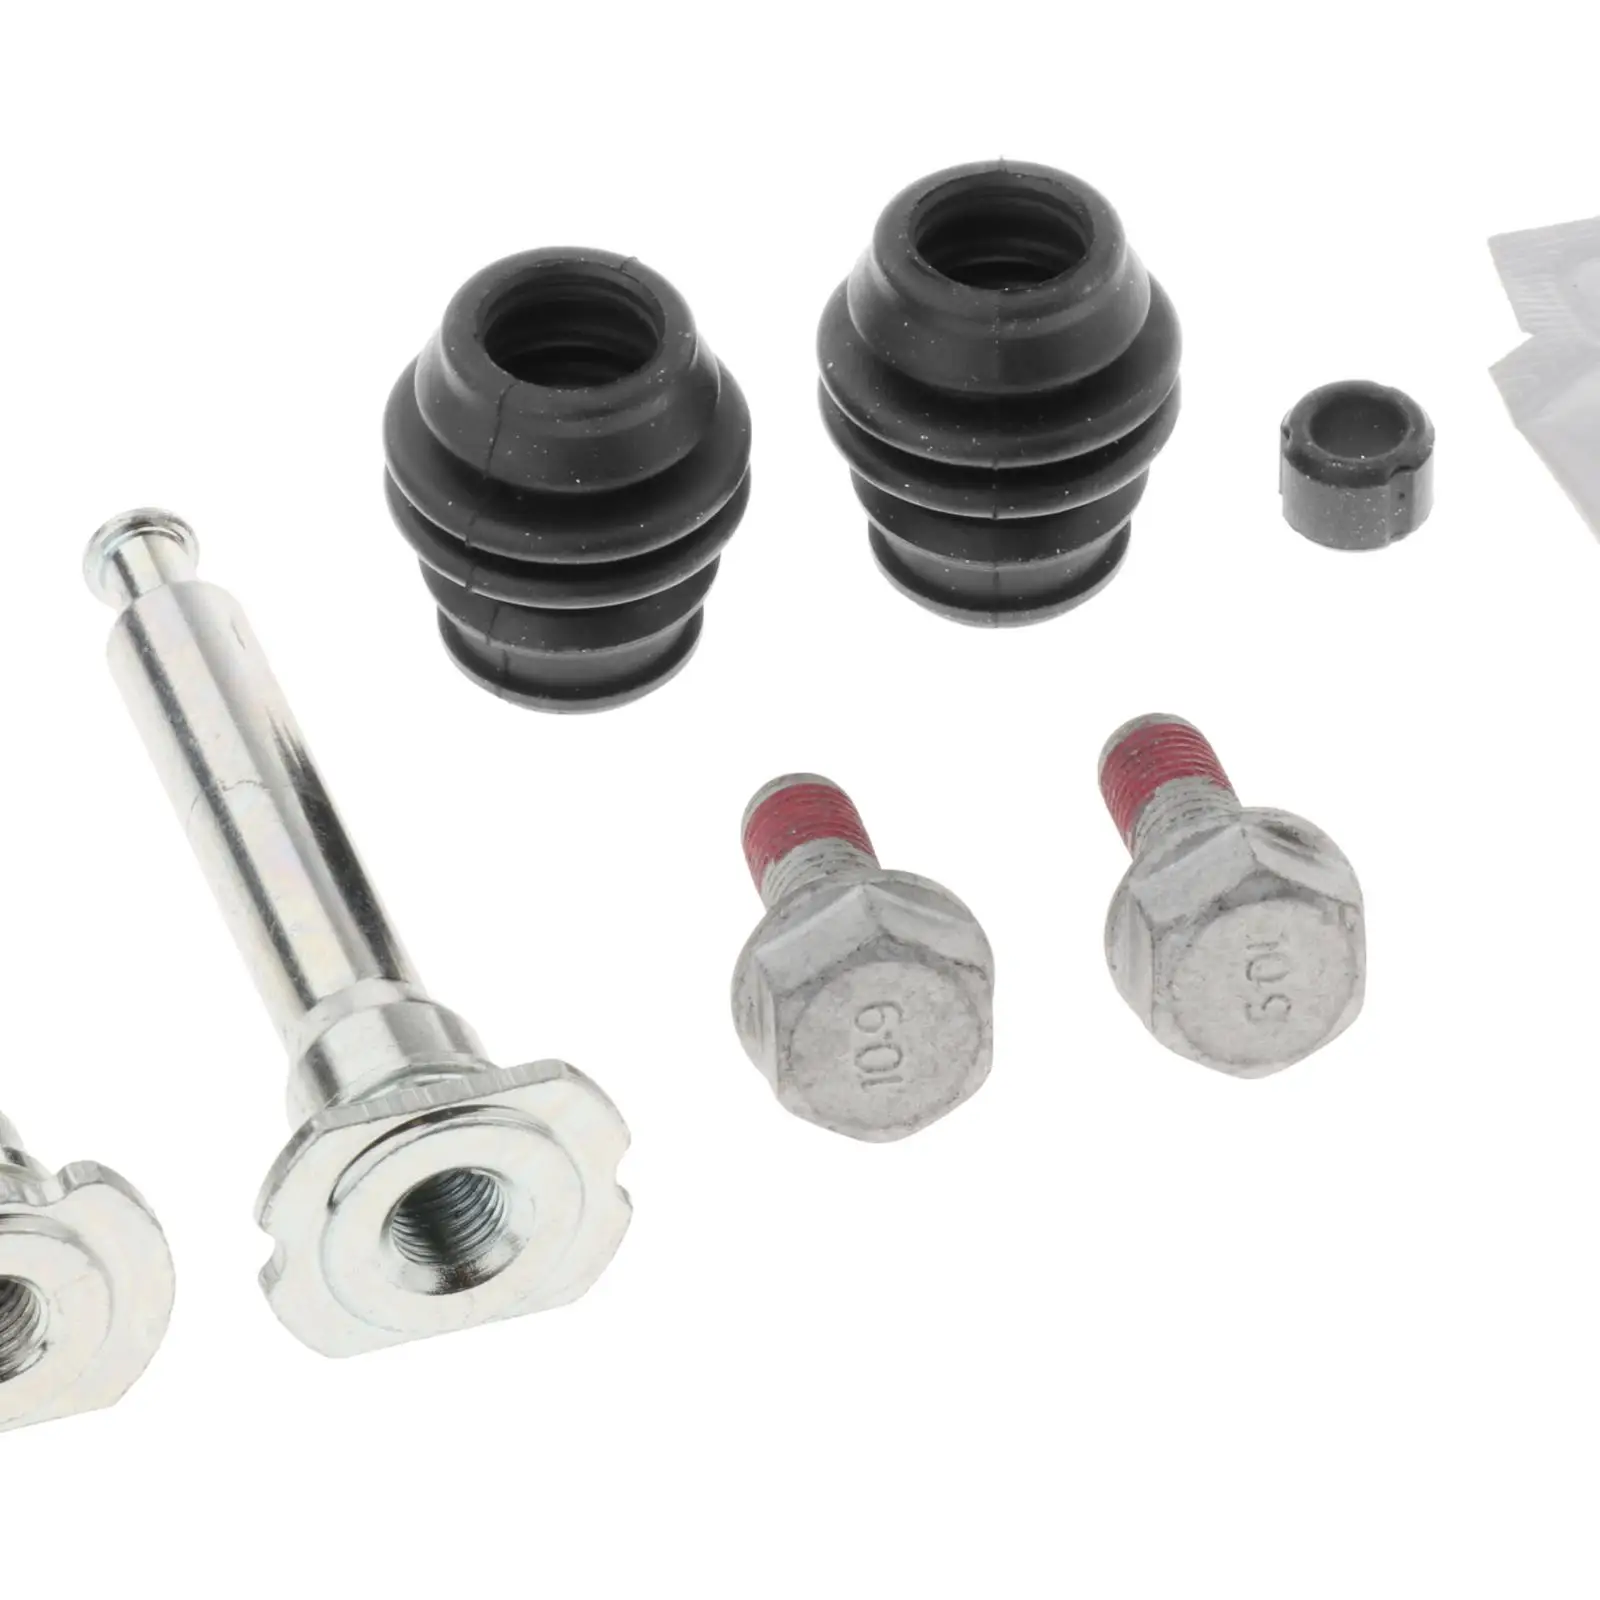 Slider Bolt Guide Pin Direct Replacement Car Truck Parts BCF1393C Pin Kit Guide Kit Fit for Honda CR-V MK2 02-06